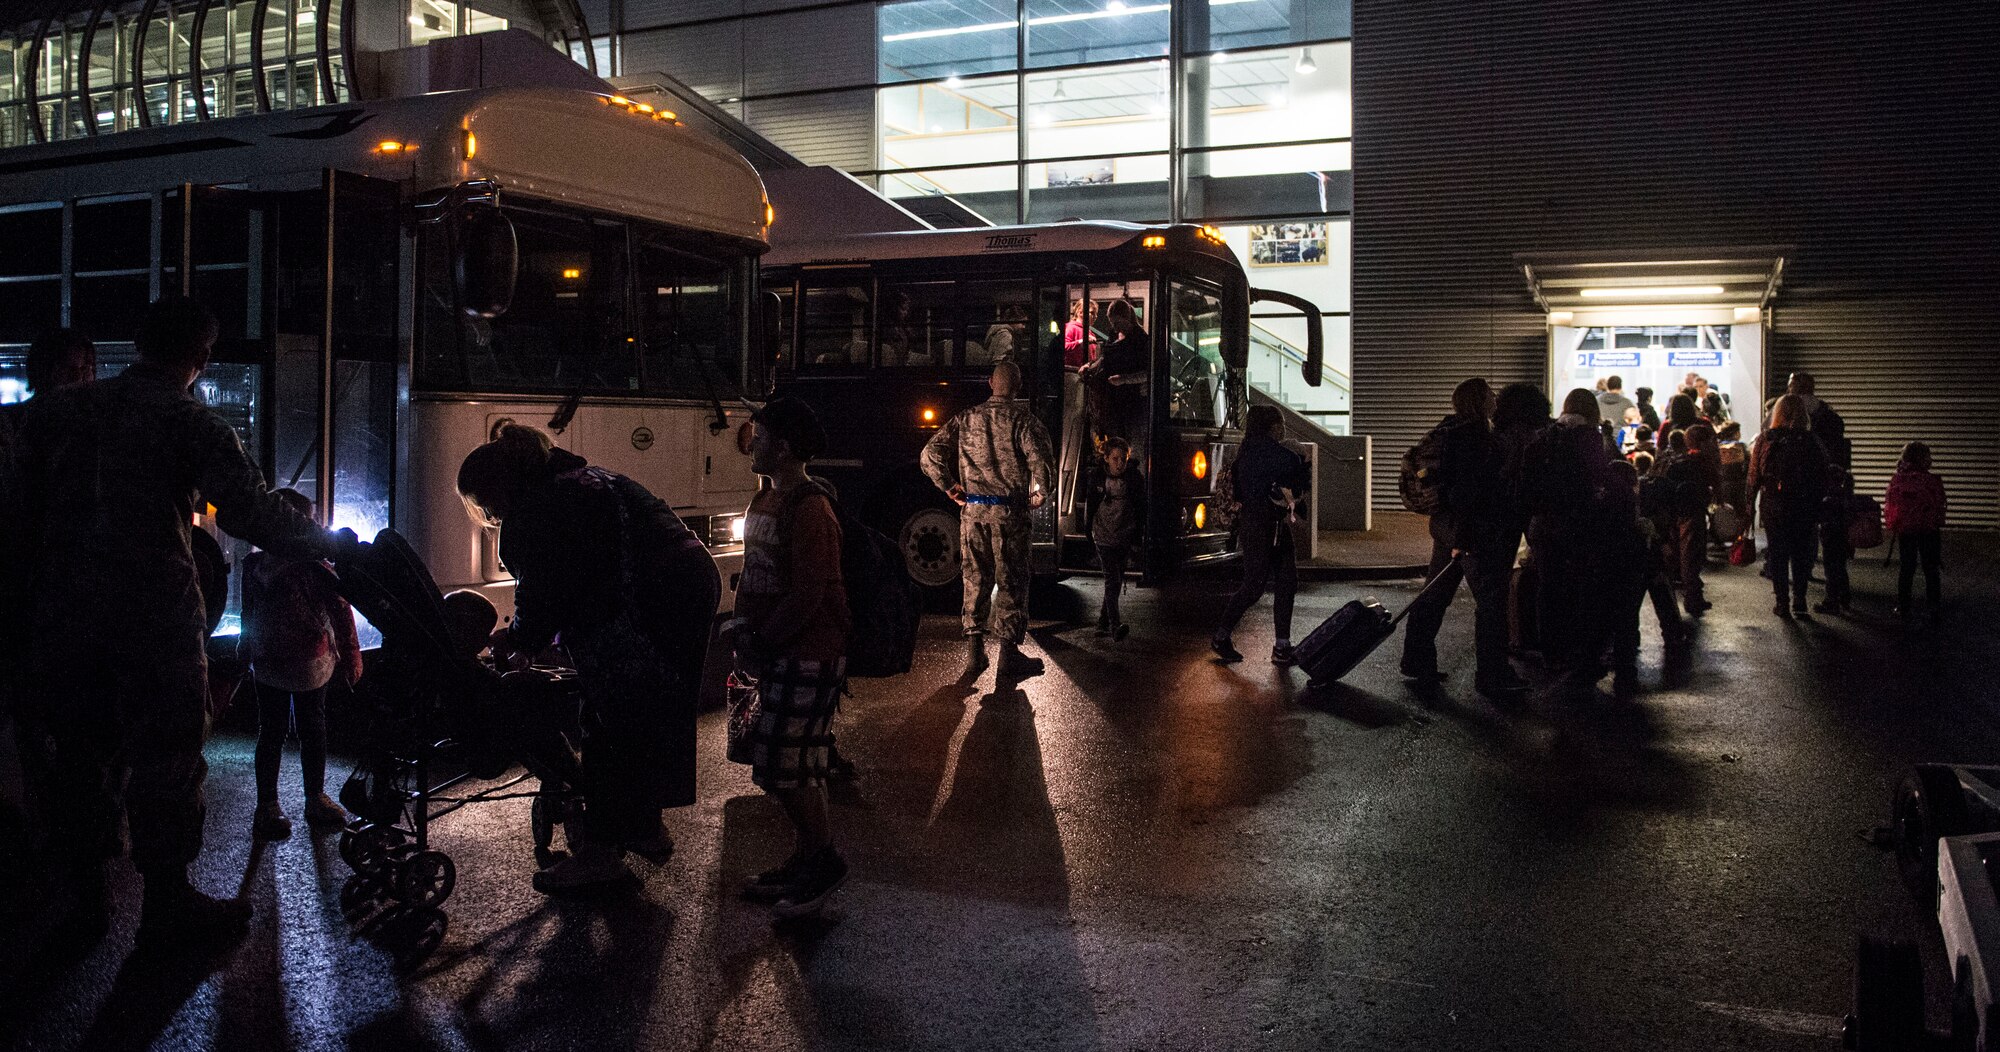 Families affected by the ordered departure of dependents of service members and Defense Department civilian personnel currently stationed in Turkey arive at Ramstein Air Base, Germany, March 30, 2016. As dependents departed Turkey, Ramstein has been designated as a 'transition location' for families to await travel to their subsequent duty locations. (U.S. Air Force photo/Staff Sgt. Sara Keller)